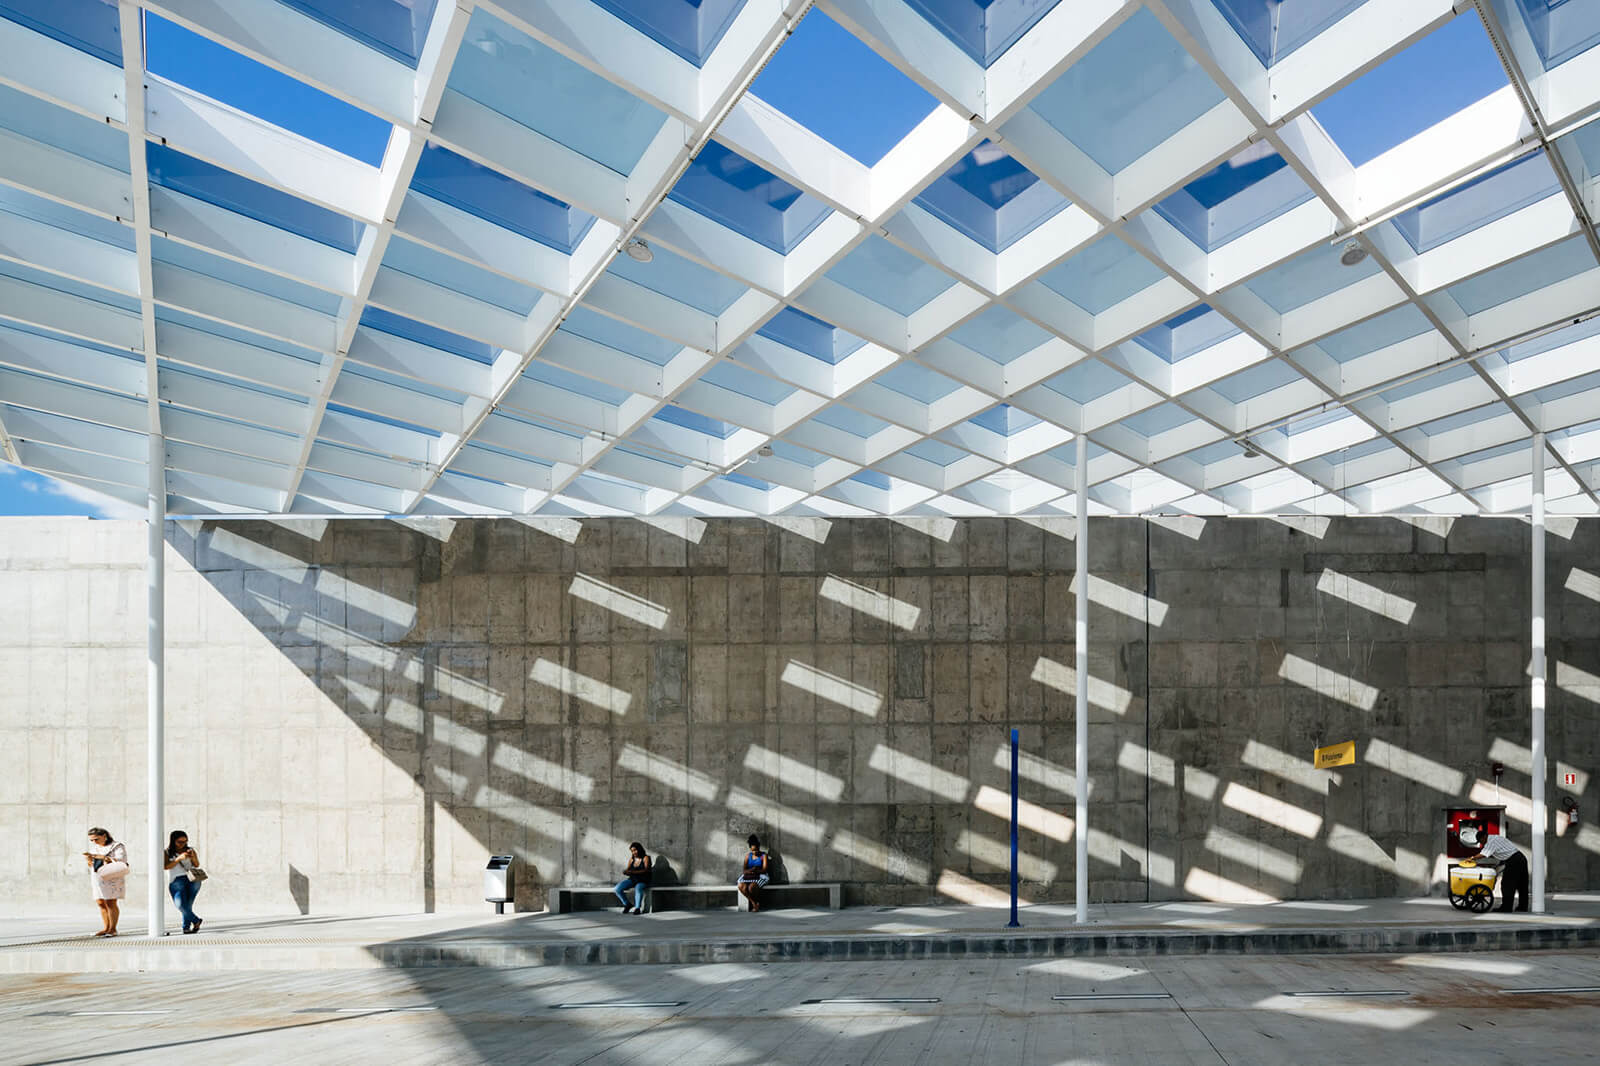 a roof structure that casts a shadow like a mosaic